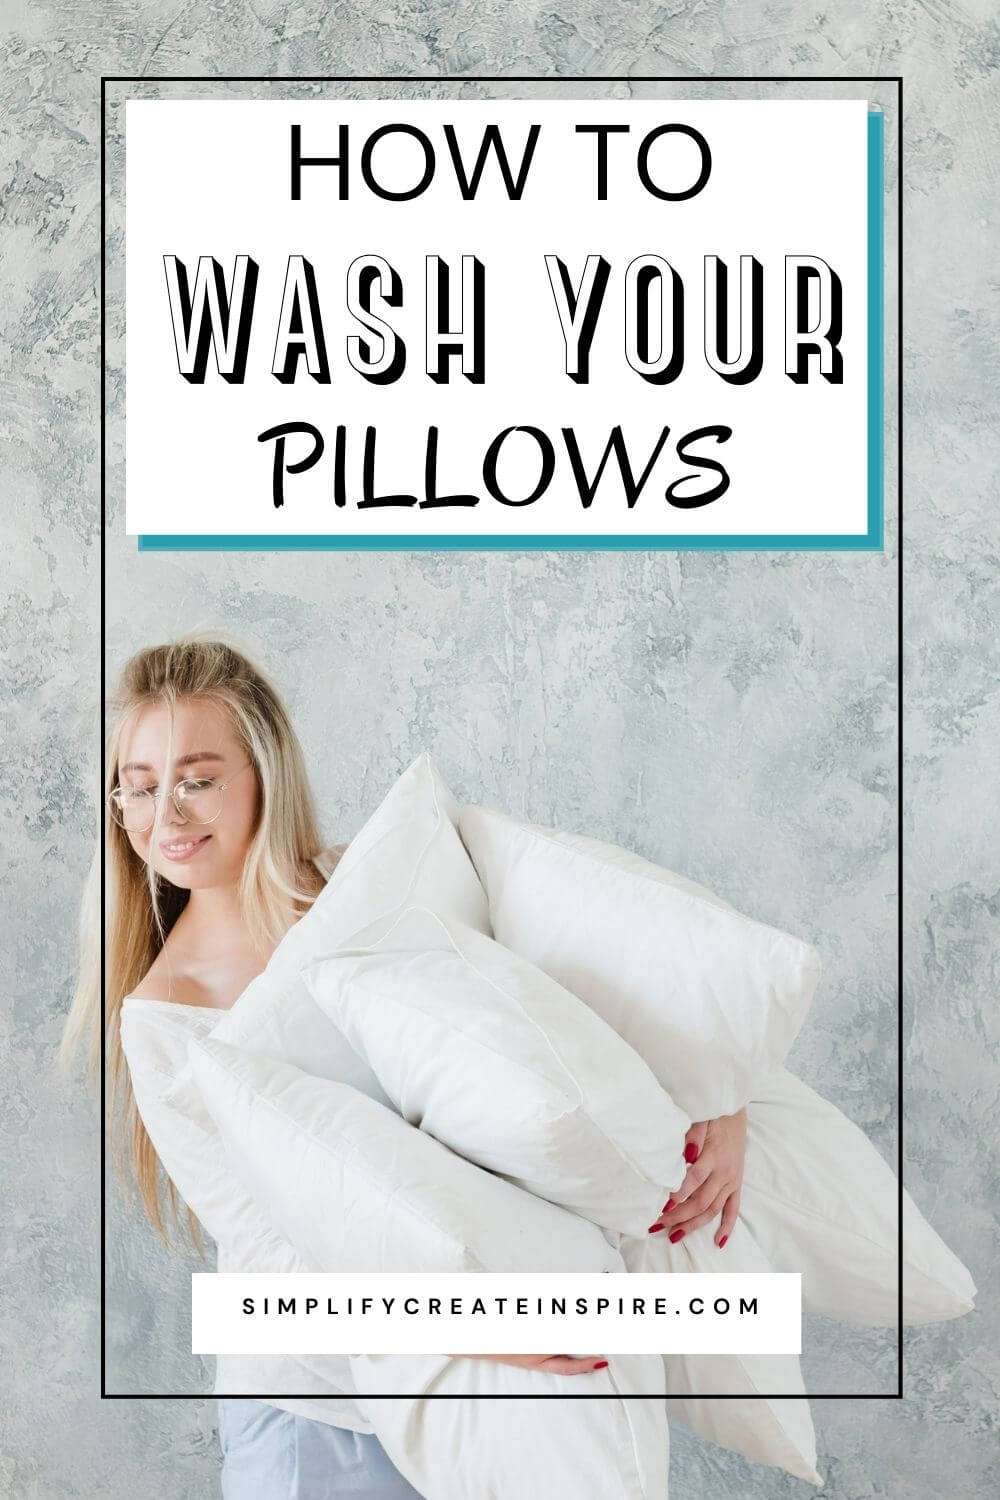 How to wash your pillows